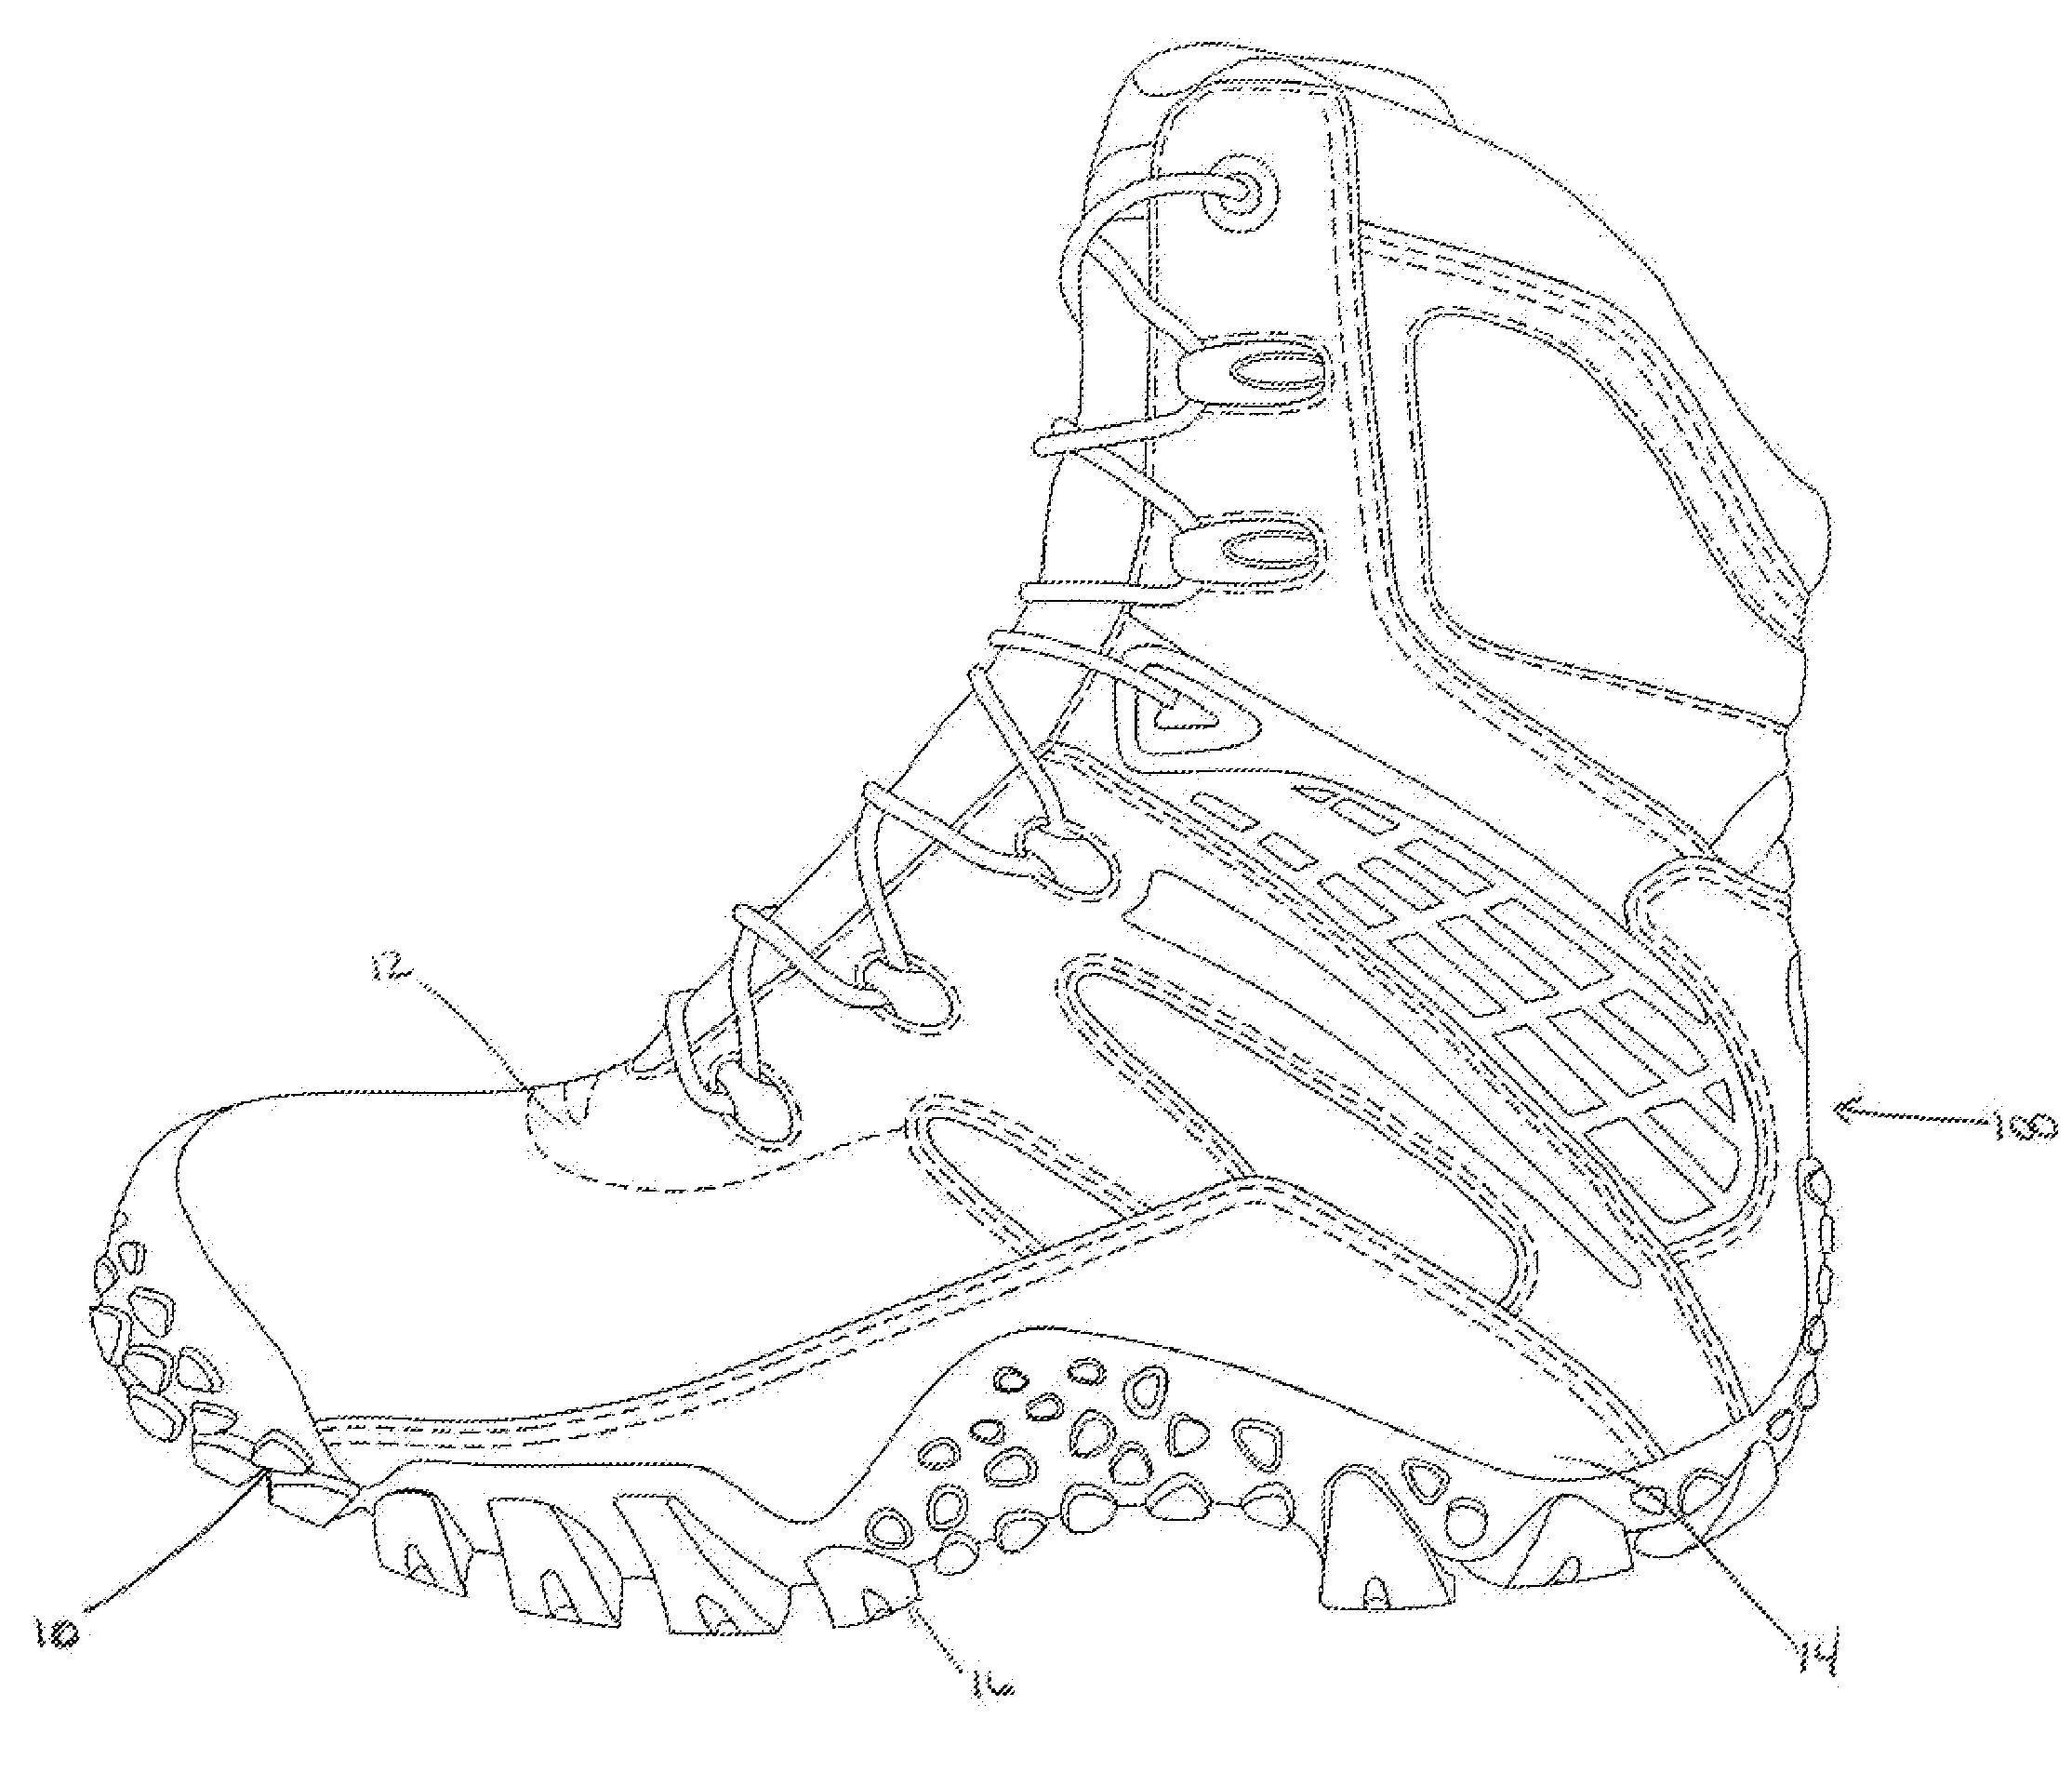 Sole component for an article of footwear and method for making same